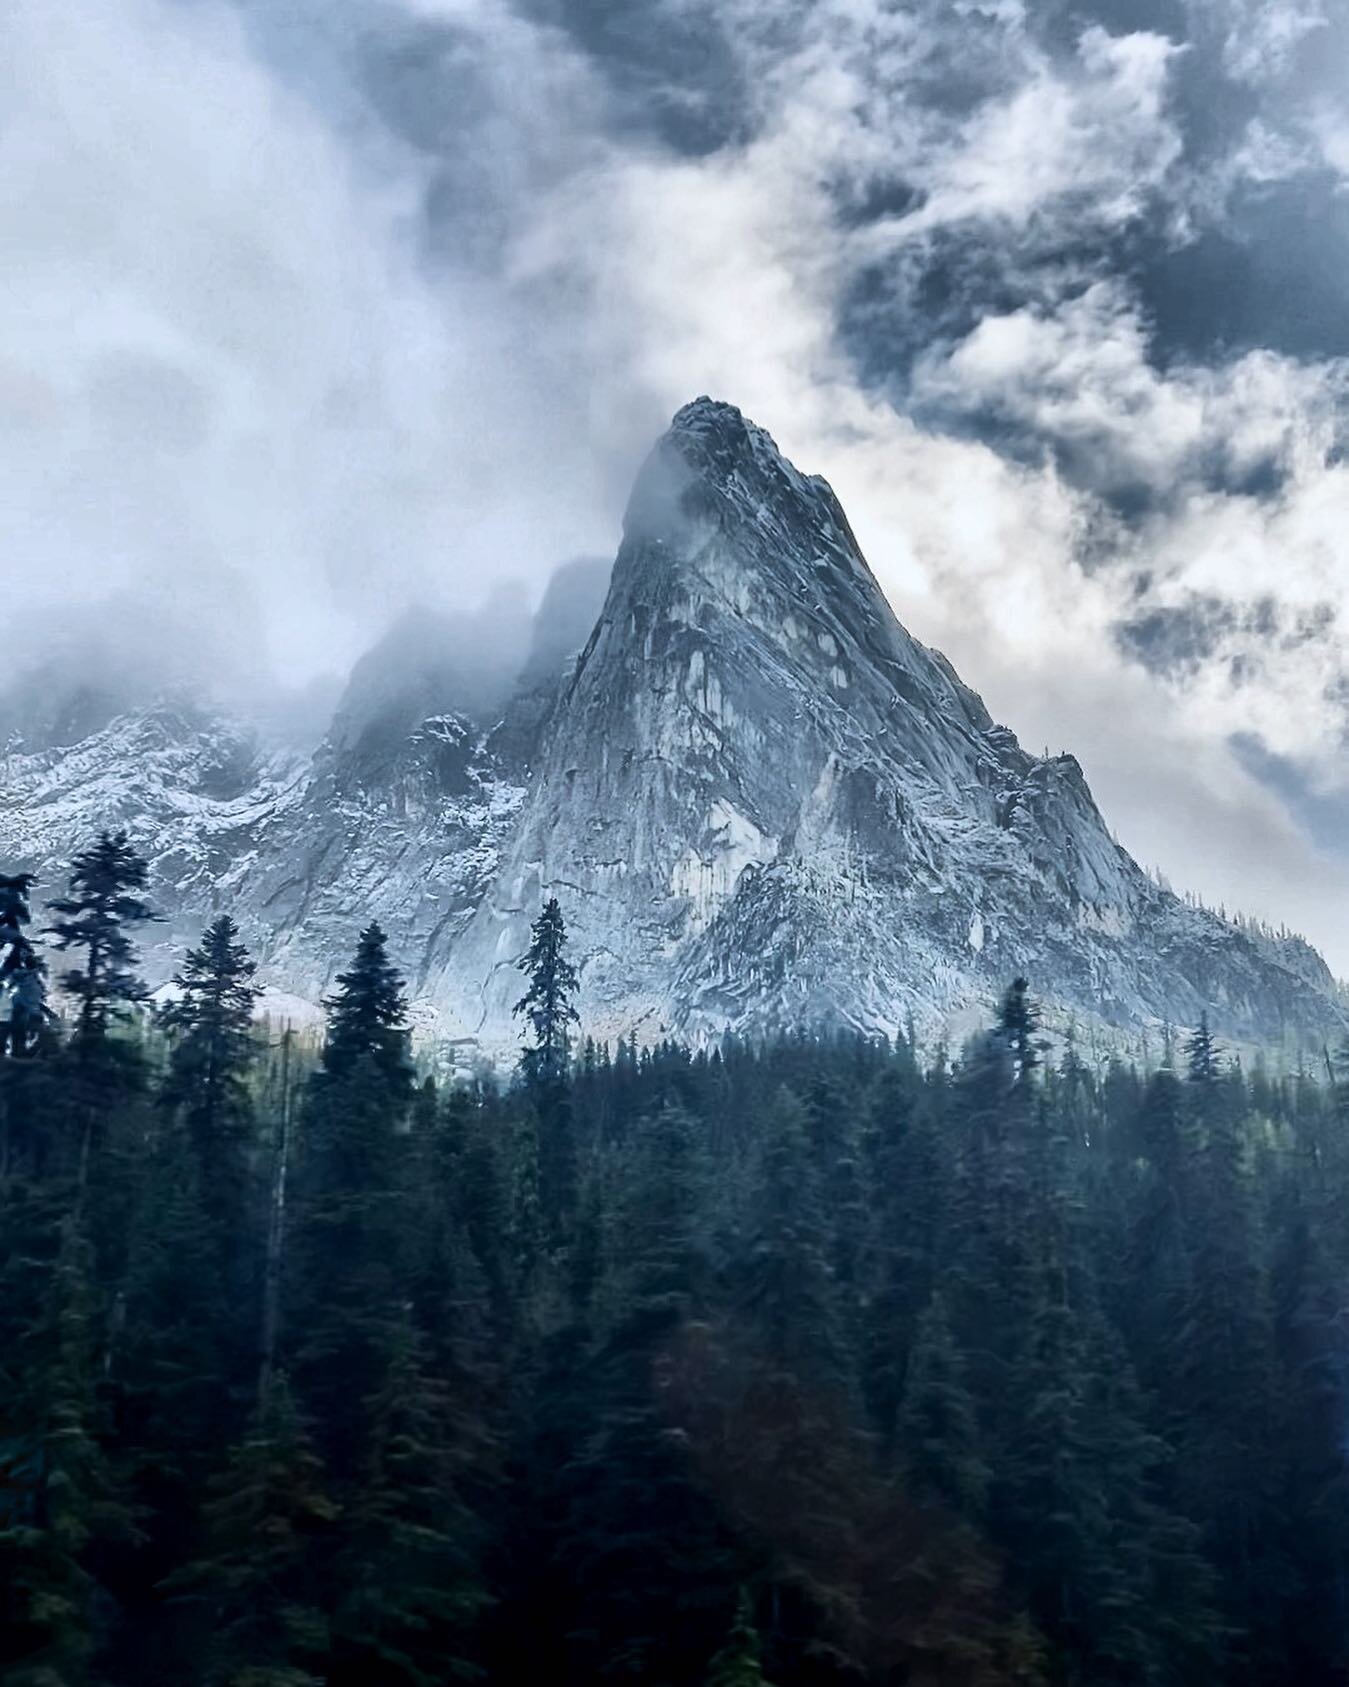 The giants are moody. Be careful out there in the changing weather. They don't care. 
.
.
.
.
.
.
@arcteryx #pnwlife #pnwwonderland #pnw #upperleftusa #washingtonexplored #wanderforever #moodygrams #pnwvibes #pnwcollective #lastingvisuals #mountainli